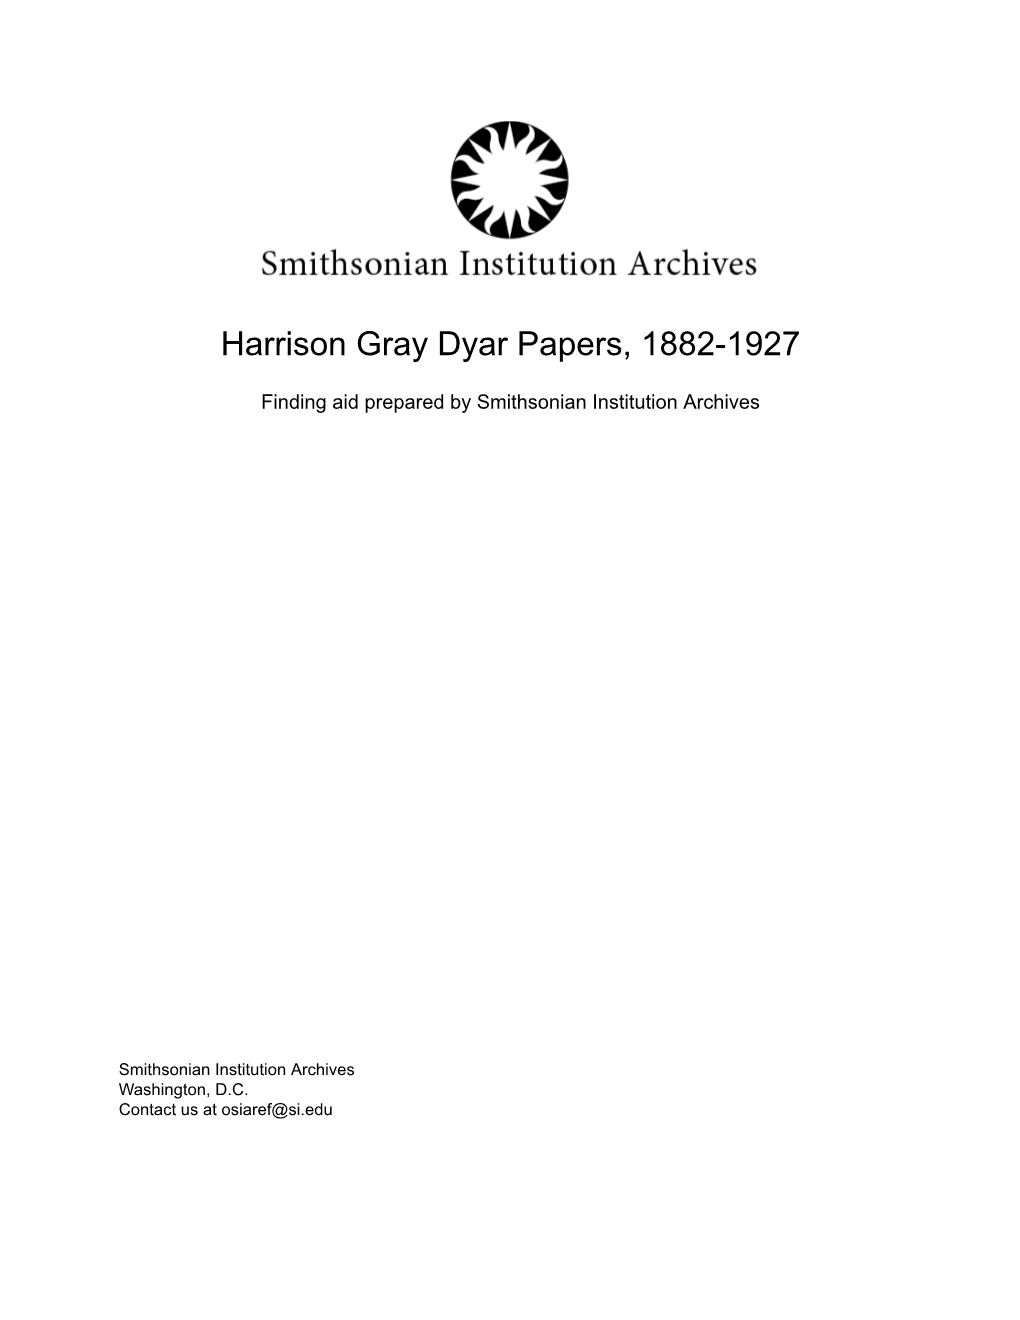 Harrison Gray Dyar Papers, 1882-1927